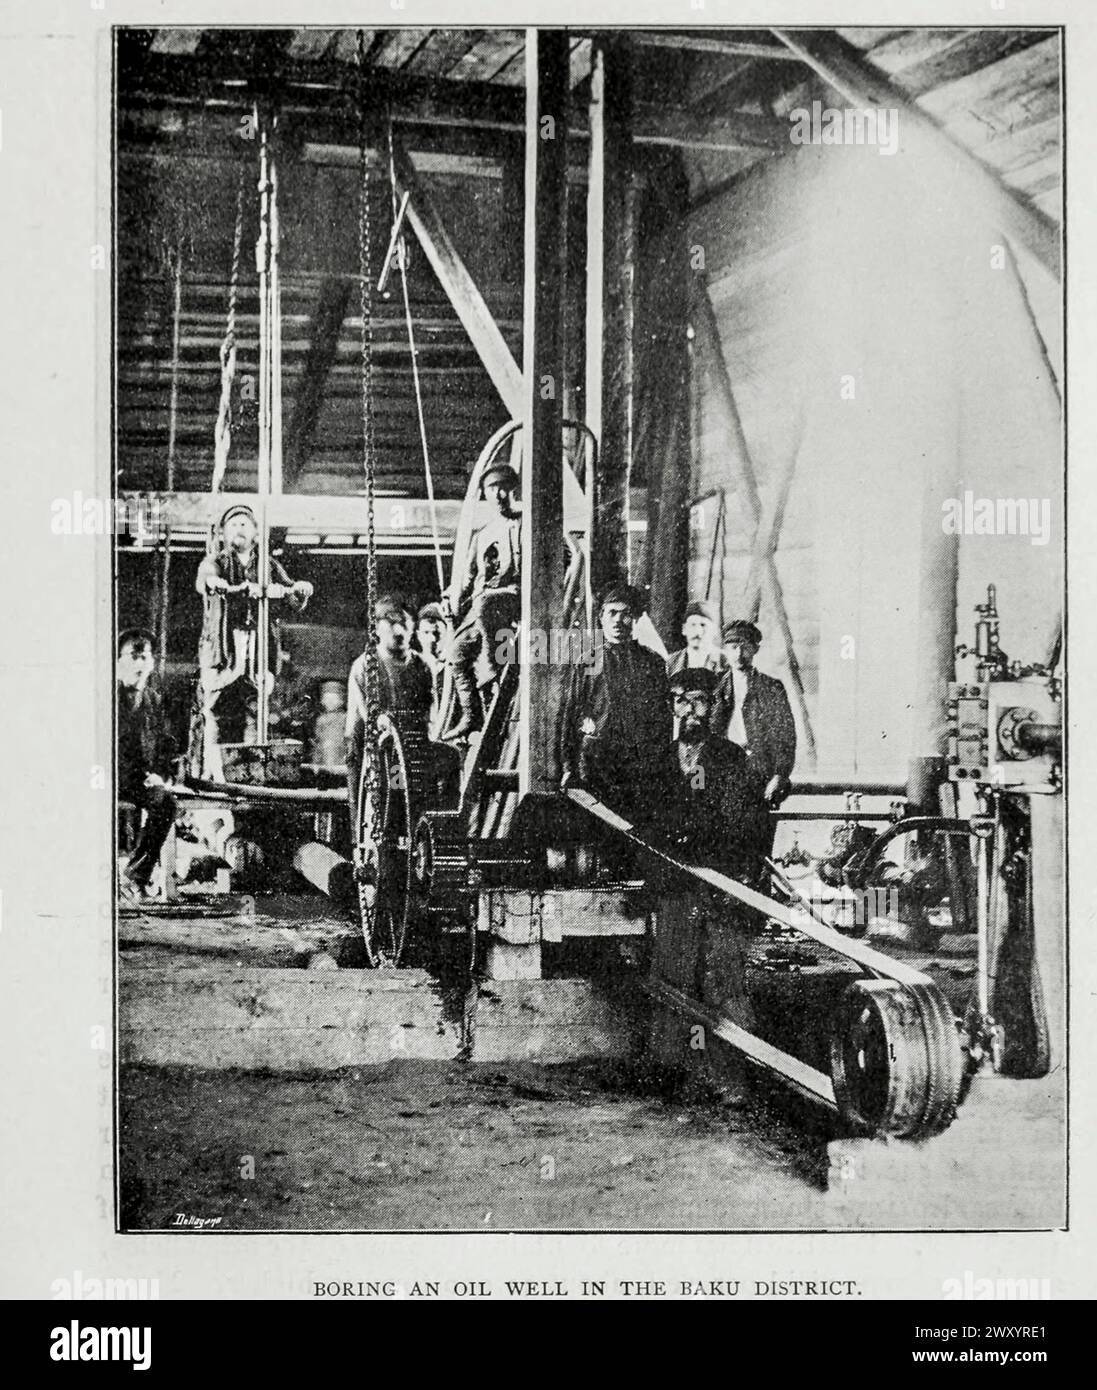 BORING AN OIL WELL IN THE BAKU DISTRICT. from the Article THE BAKU PETROLEUM DISTRICT OF RUSSIA. By David A. Louis. from The Engineering Magazine Devoted to Industrial Progress Volume XV 1898 The Engineering Magazine Co Stock Photo